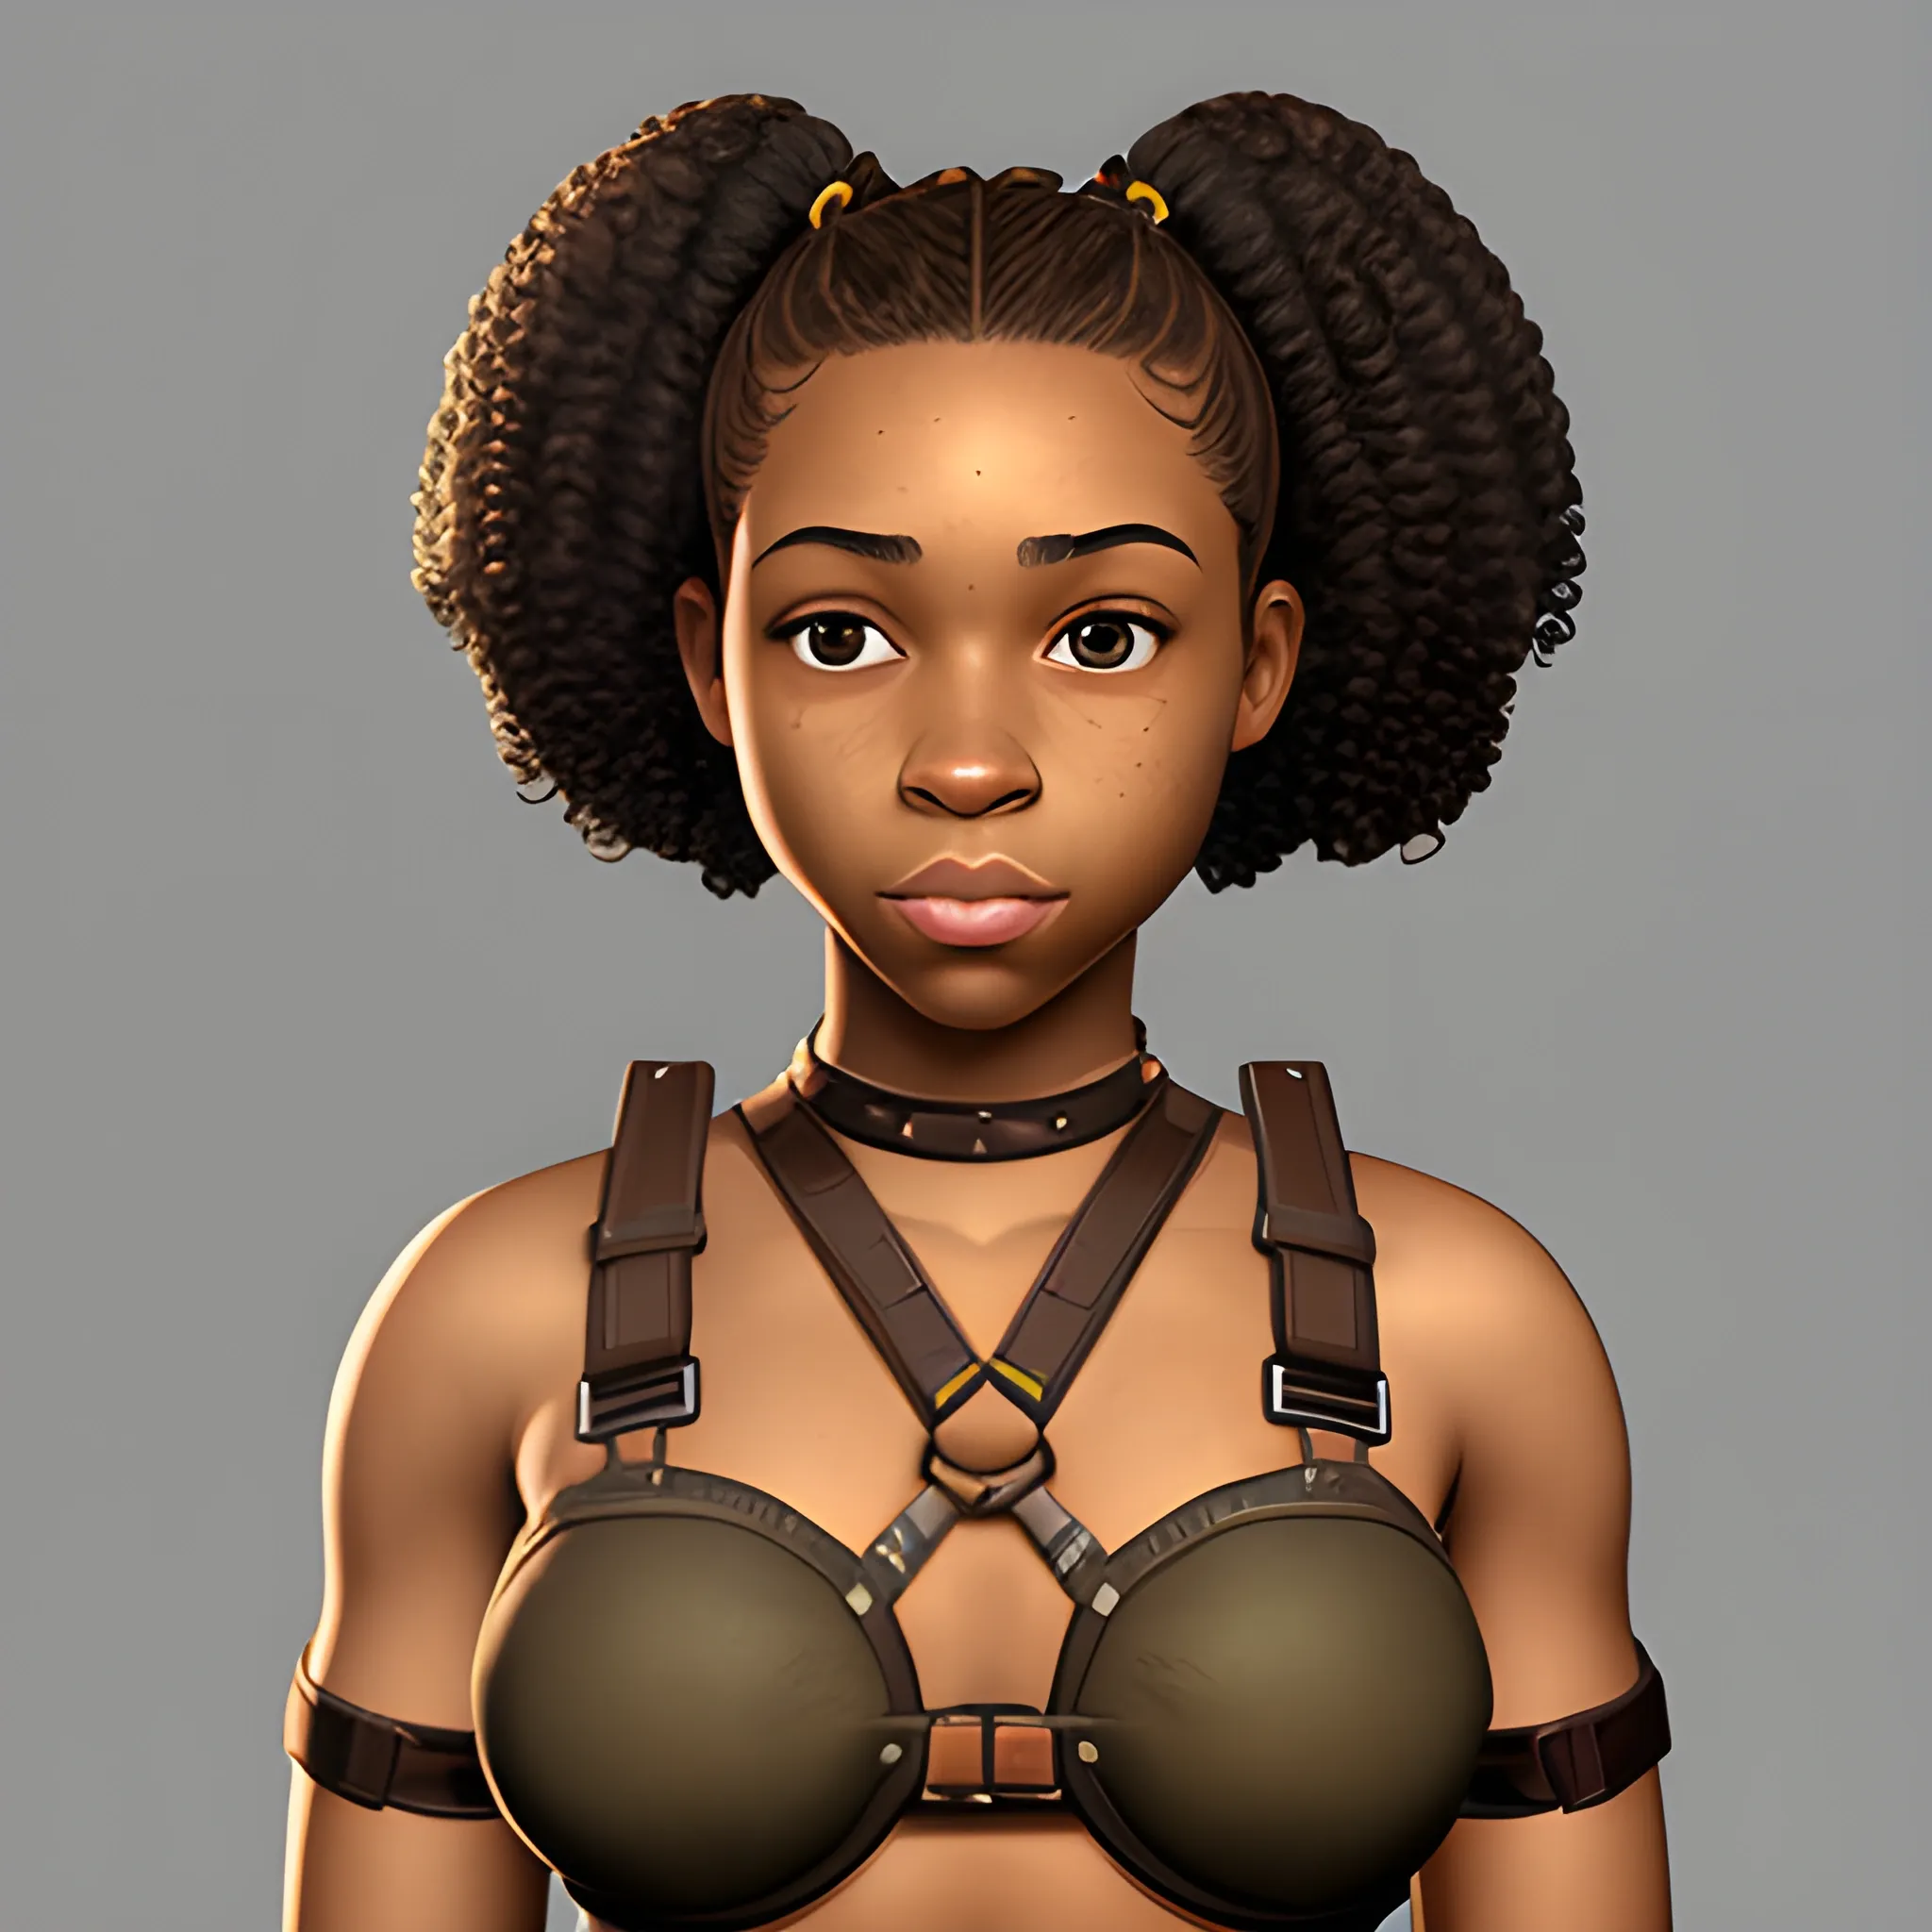 In the style of fallout 1, (masterpiece), (portrait photography), pixel art, (portrait of 20 years old African-American female), no makeup, flat chested, harness outfit made out of straps, no bra, no bikini, average face, an average looking African-American woman, curly ponytail, curly ponytail brown hair, (brown eyes), (full body), Centered image, character sheet, concept art